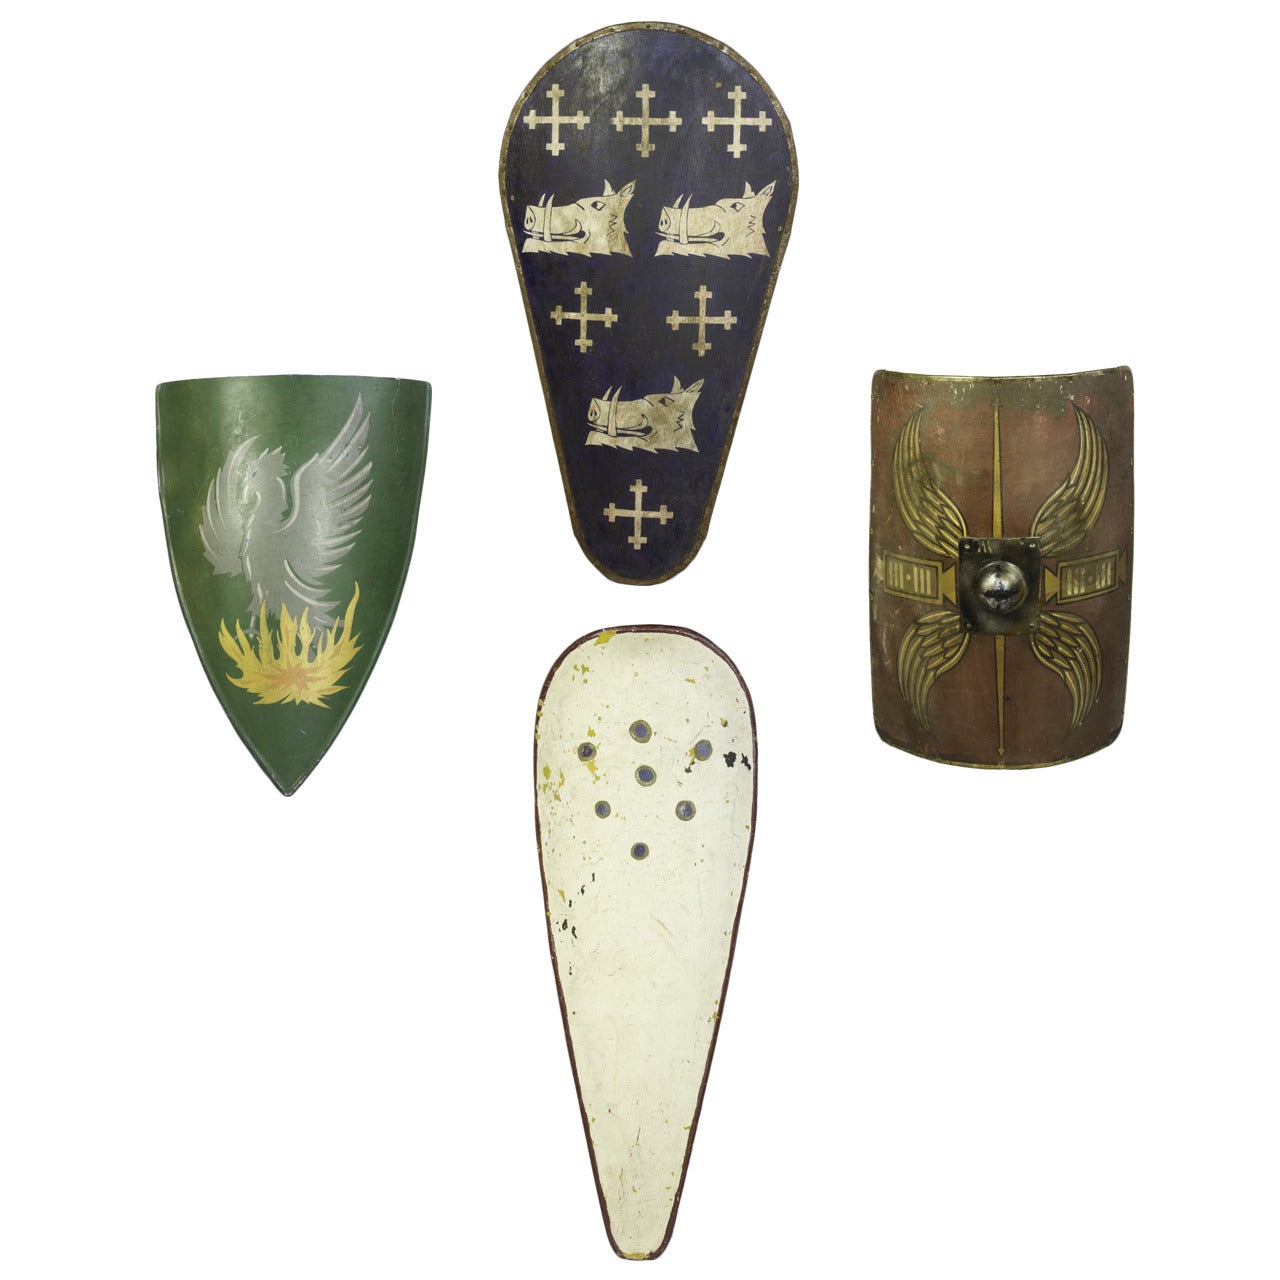 Group of Four Decorative Wall Hanging Shields For Sale